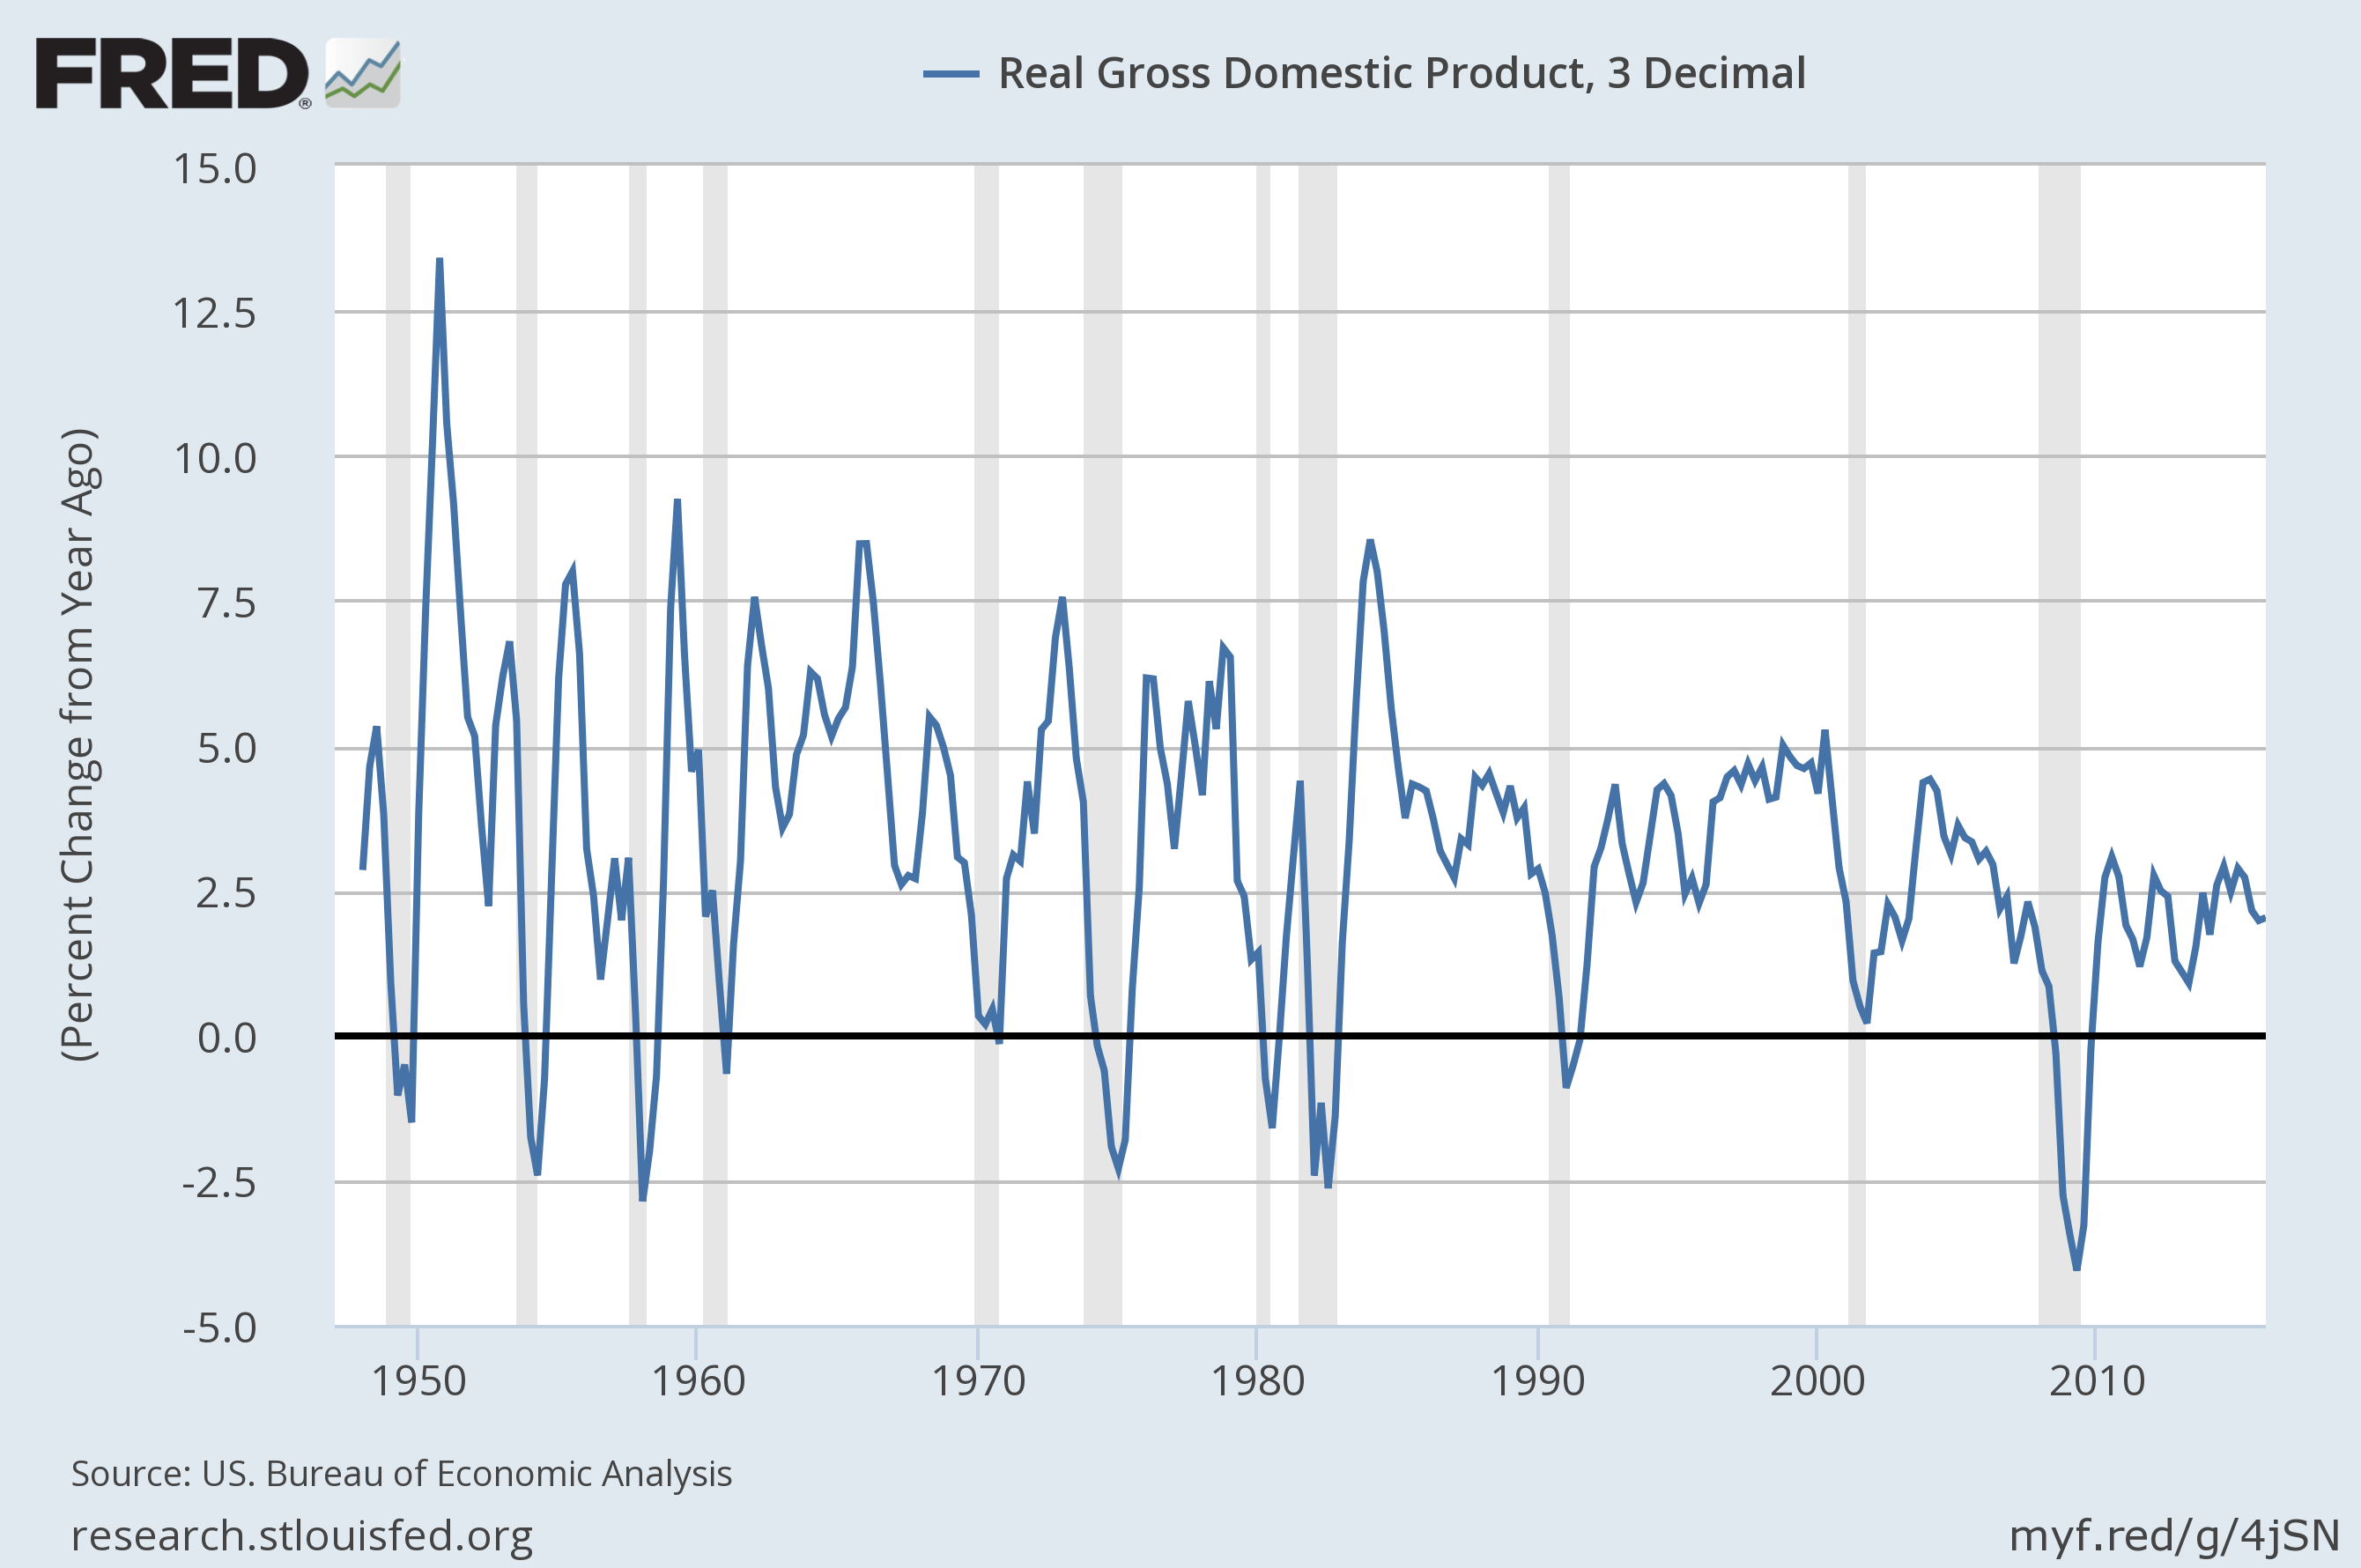 Real Gross Domestic Product 3 Decimal